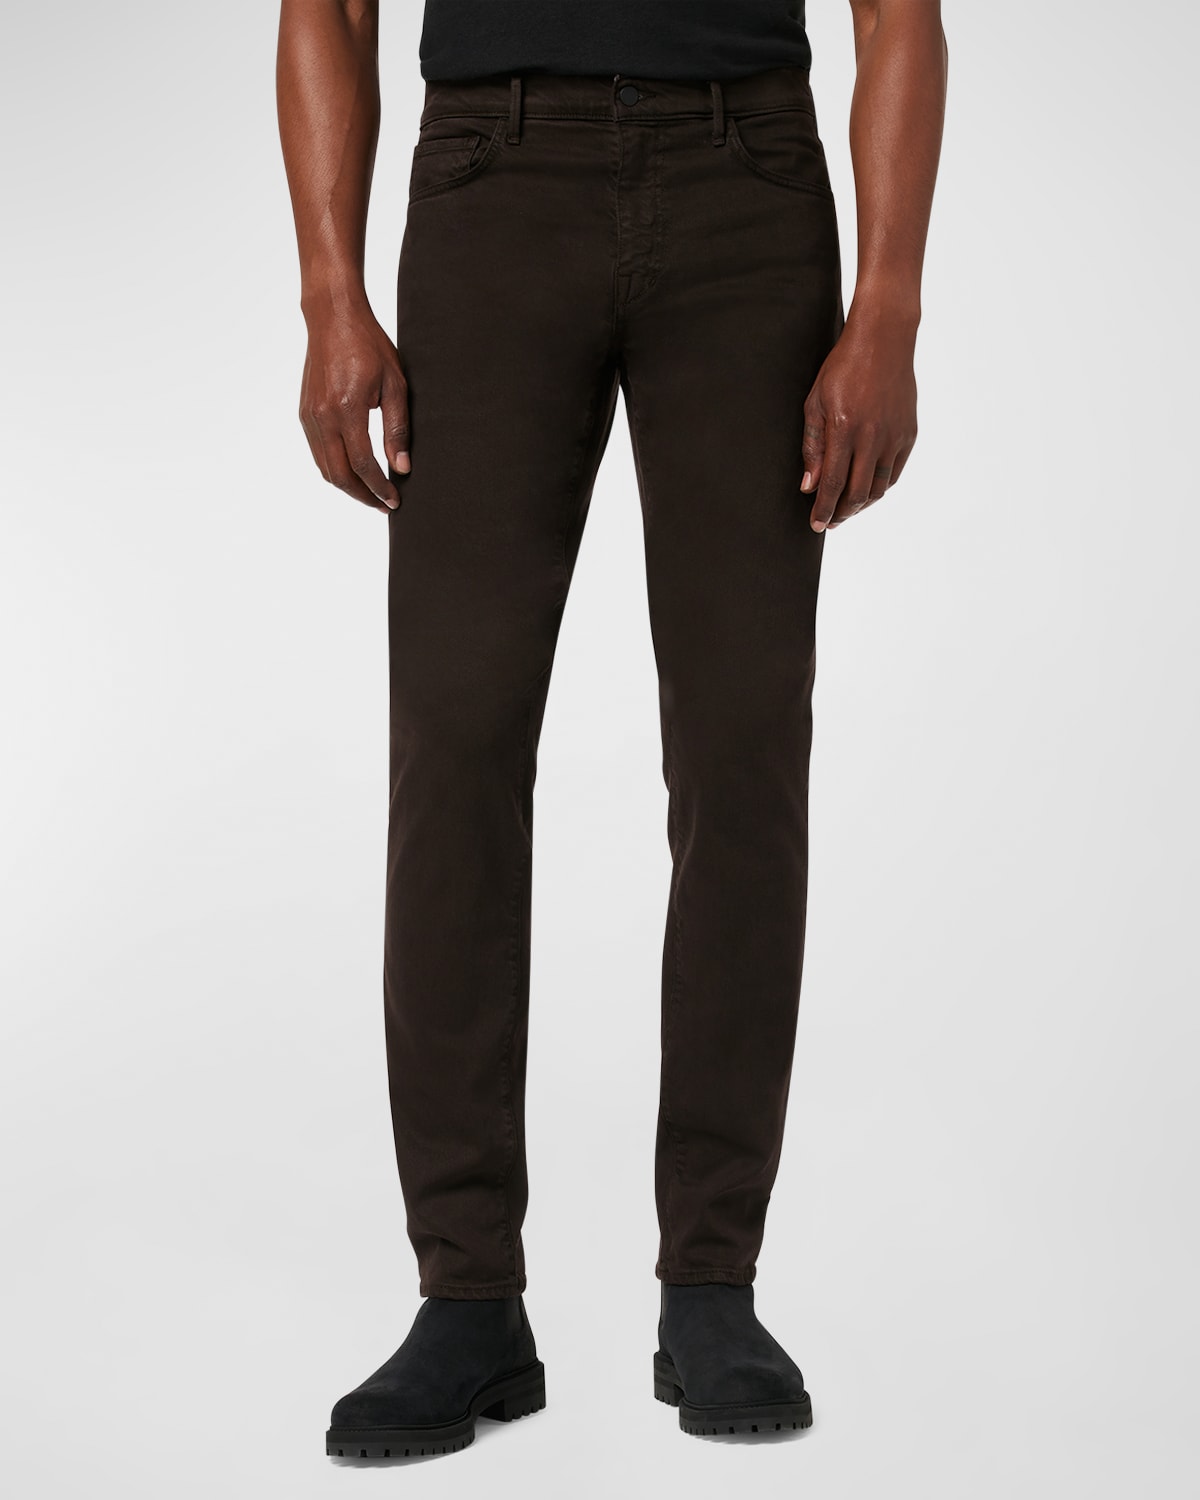 Joe's Jeans The Asher Slim Fit Jeans In Colorado Brown